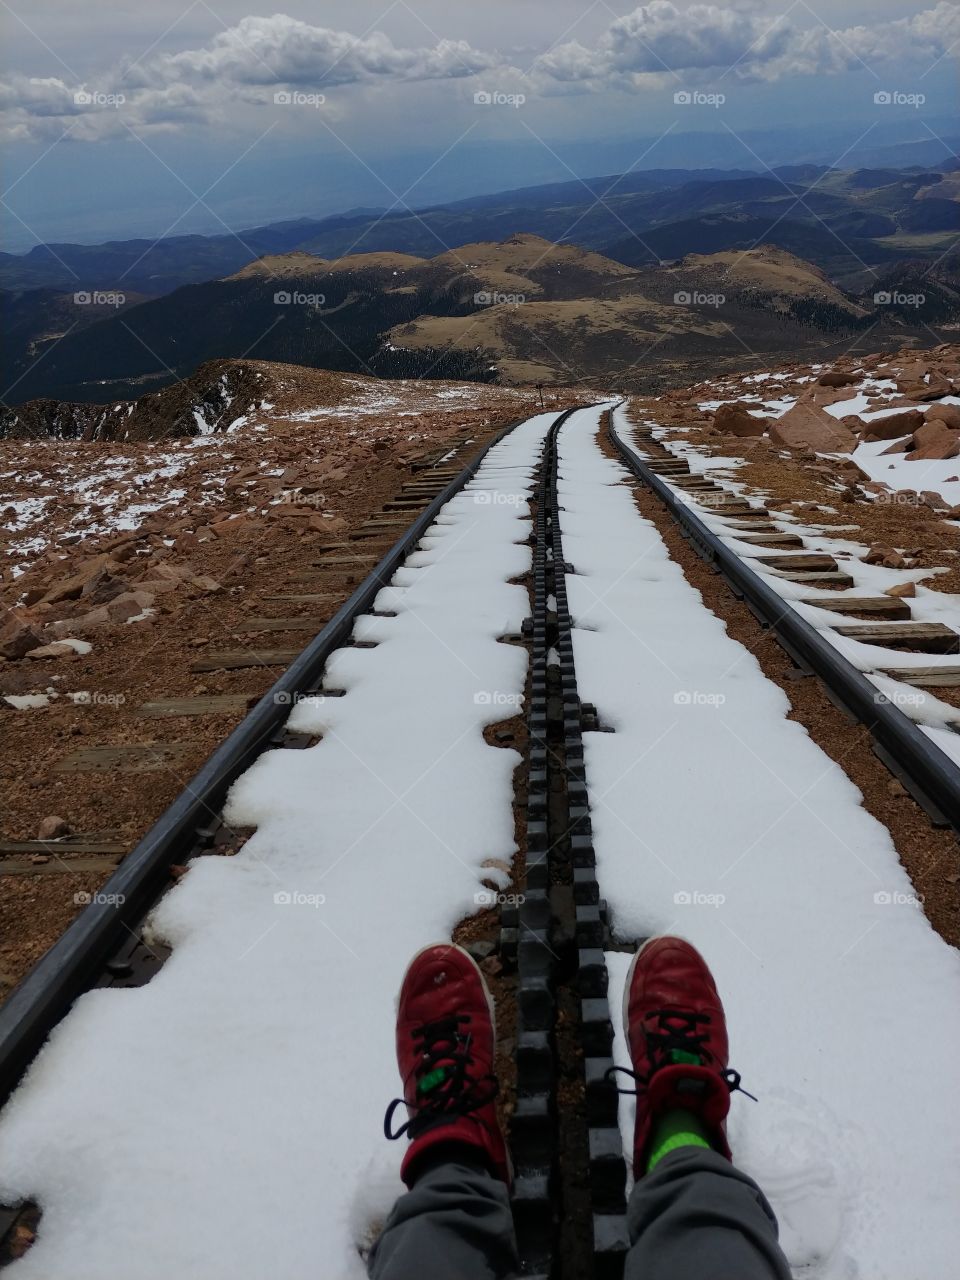 On the train tracks, in Colorado, on a high mountain top.